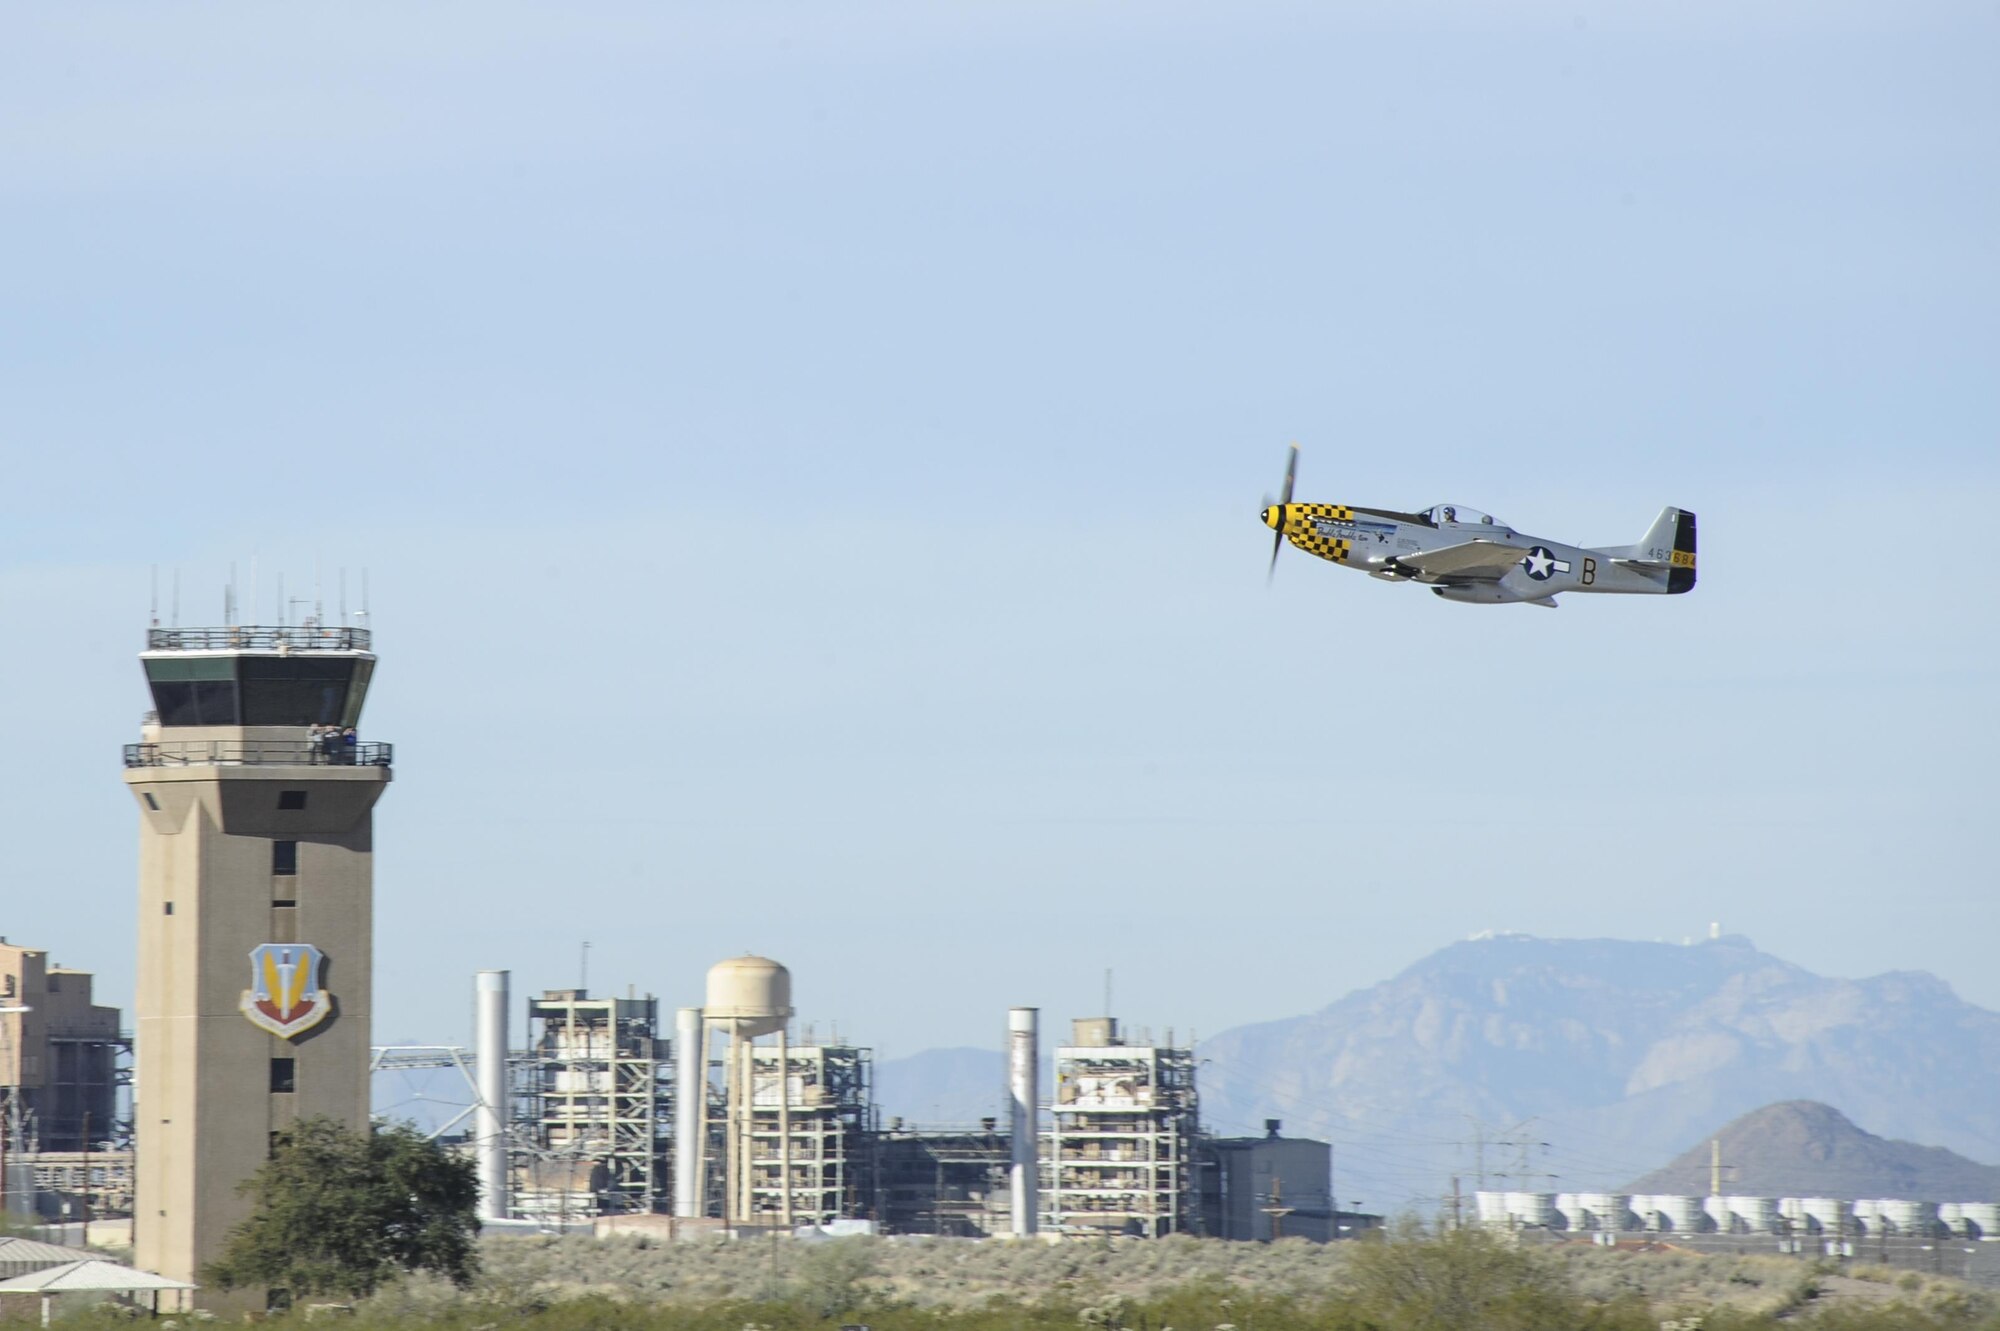 A P-40 Warhawk takes off during the 2017 Heritage Flight Training and Certification Course at Davis-Monthan Air Force Base, Ariz., Feb. 10, 2017. Established in 1997, the HFTCC certifies civilian pilots of historic military aircraft and U.S. Air Force pilots to fly in formation together during the upcoming air show season. (U.S. Air Force photo by Airman 1st Class Mya M. Crosby)